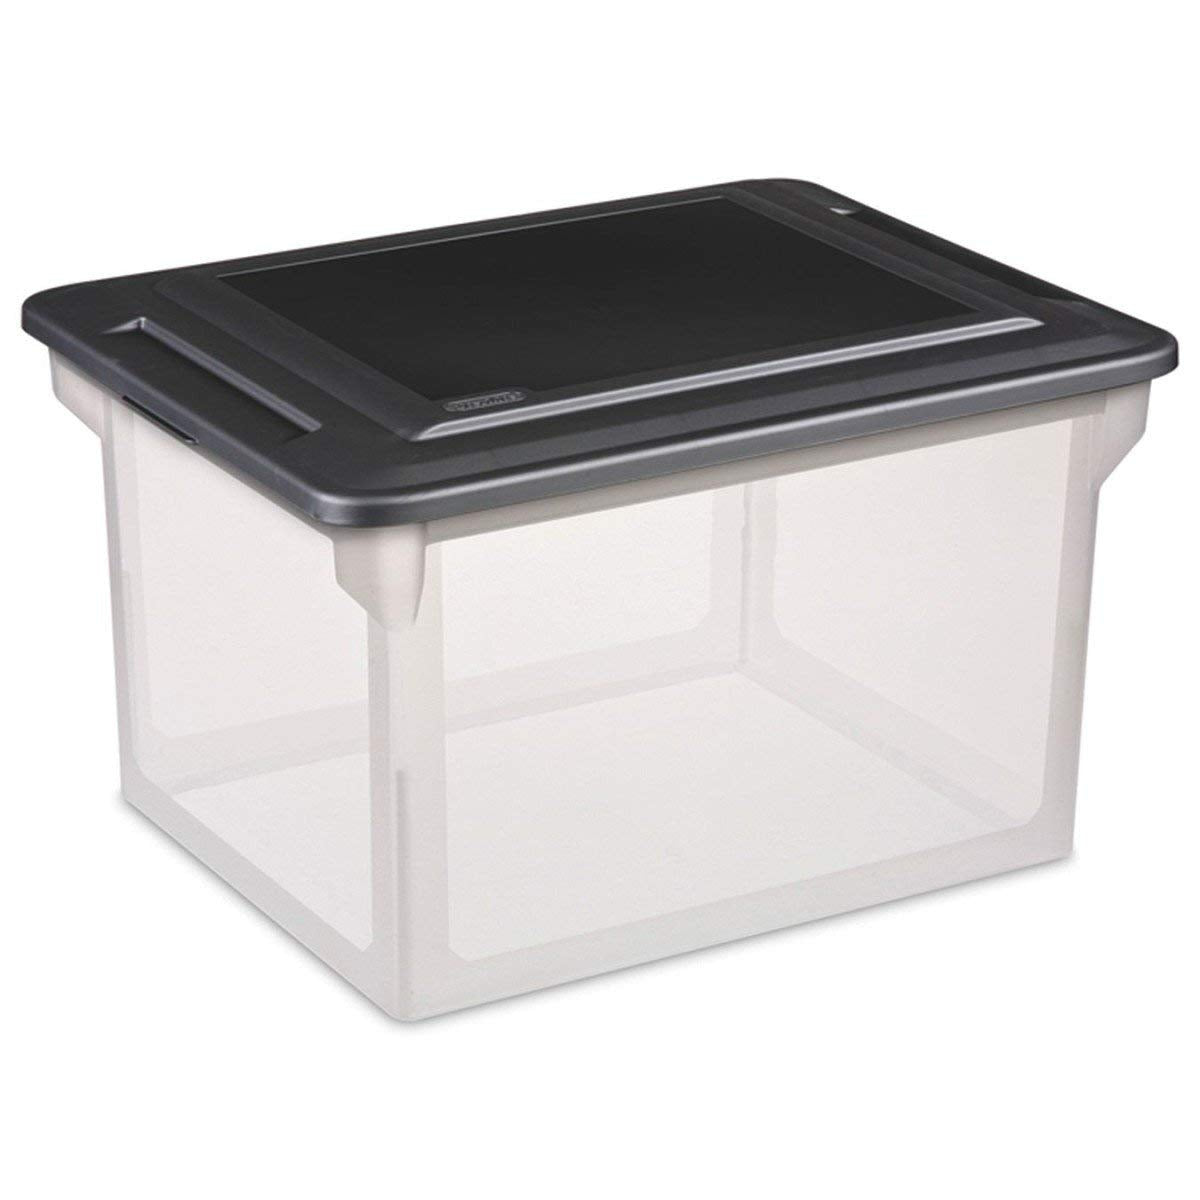 Buy sterilite 18689004 - Online store for storage & organizers, storage containers in USA, on sale, low price, discount deals, coupon code